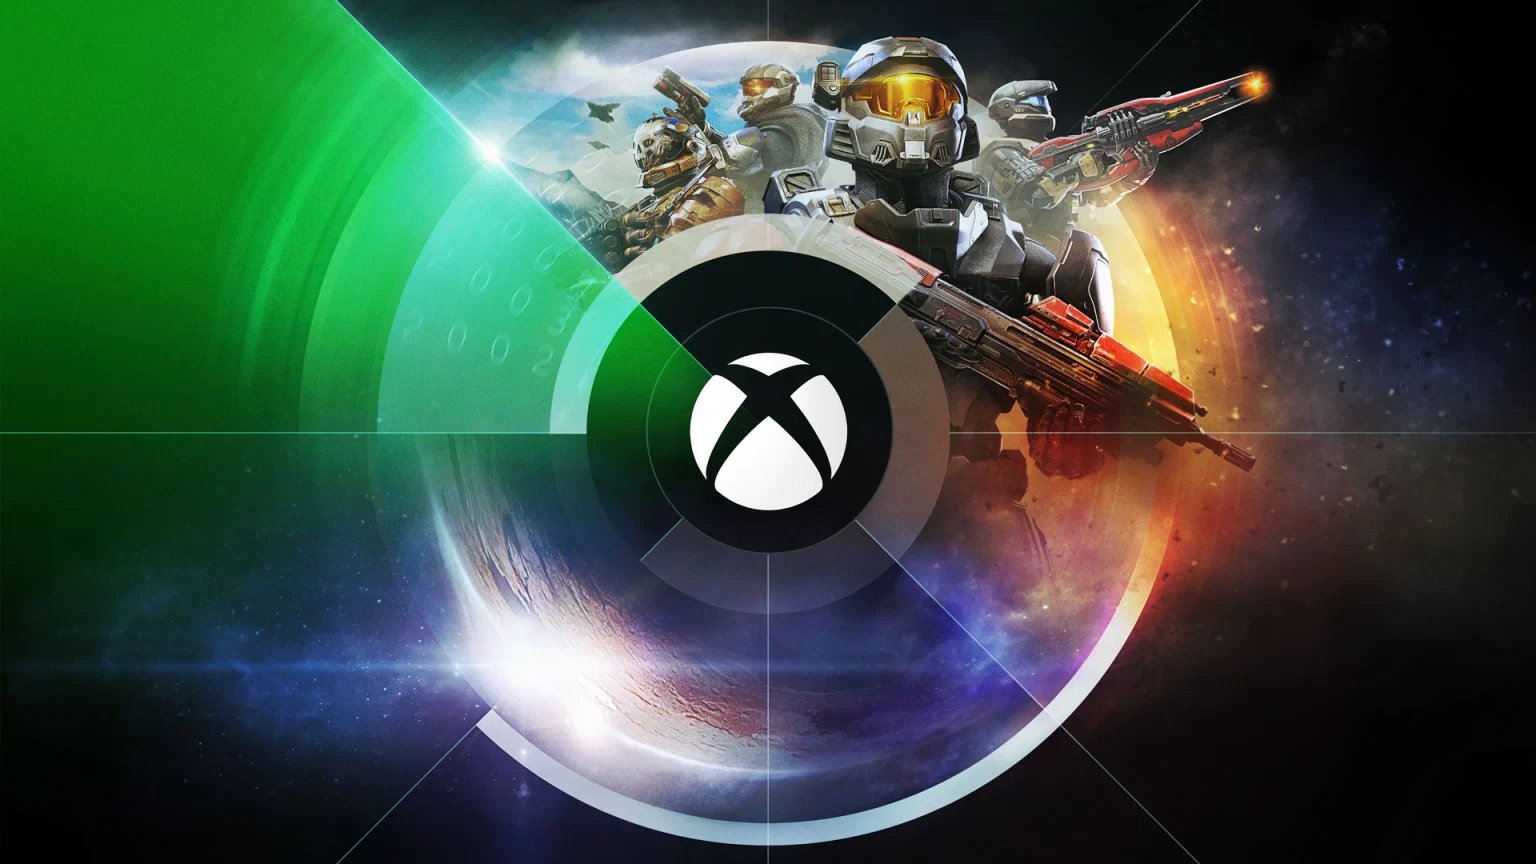 News Platform Xbox Games Showcase Announced for June 11 before the